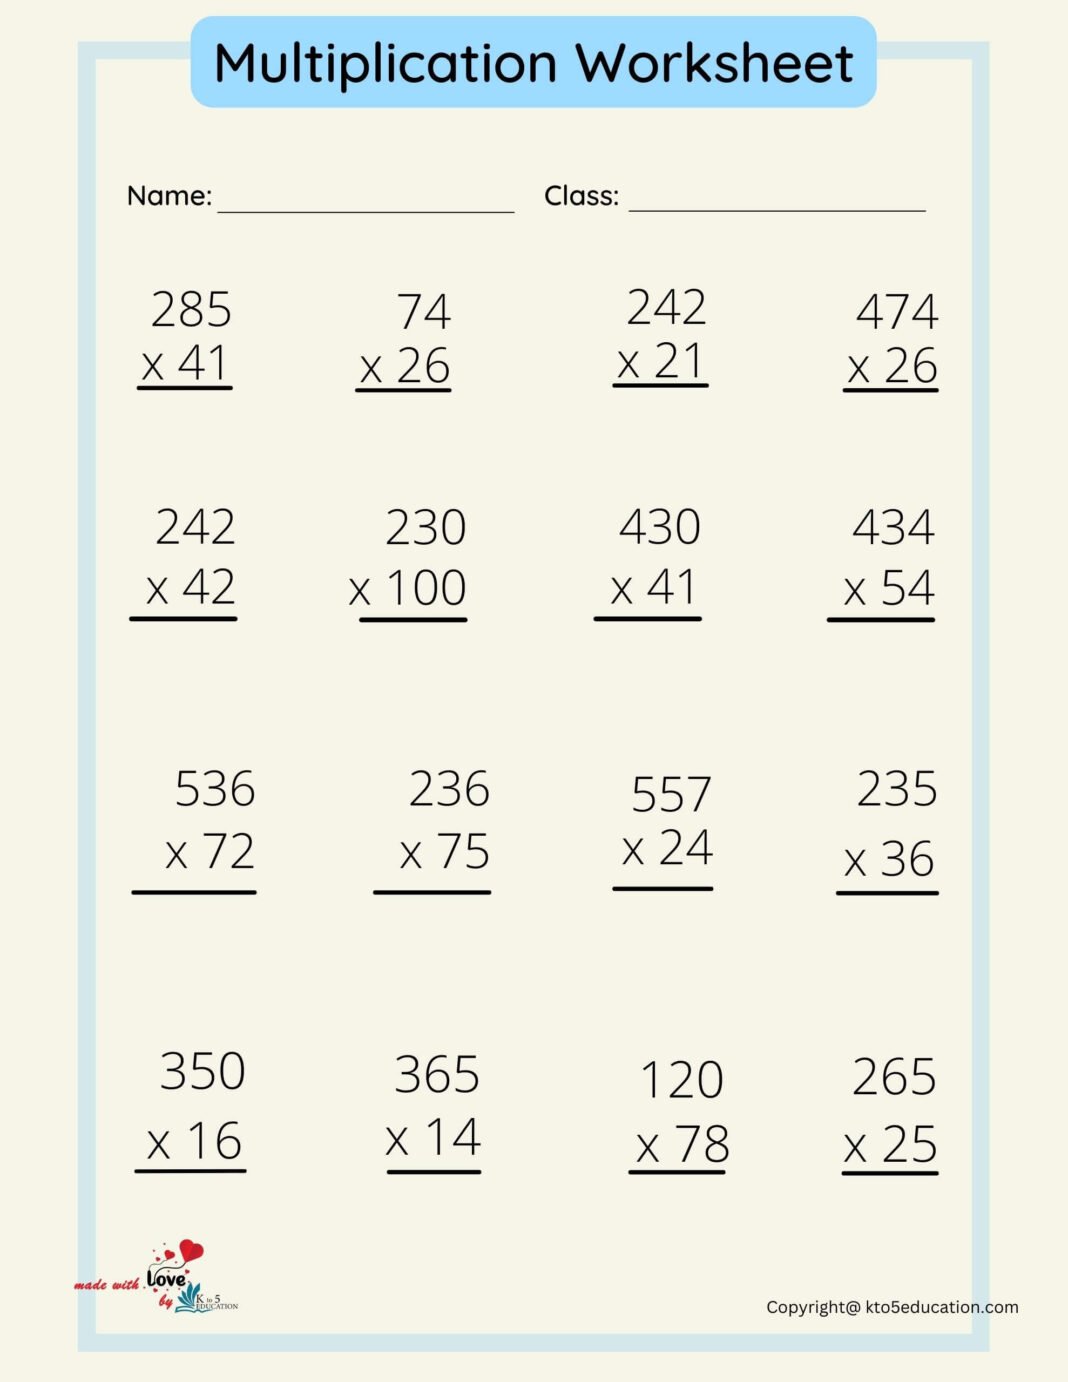 long-multiplication-questions-and-answers-worksheet